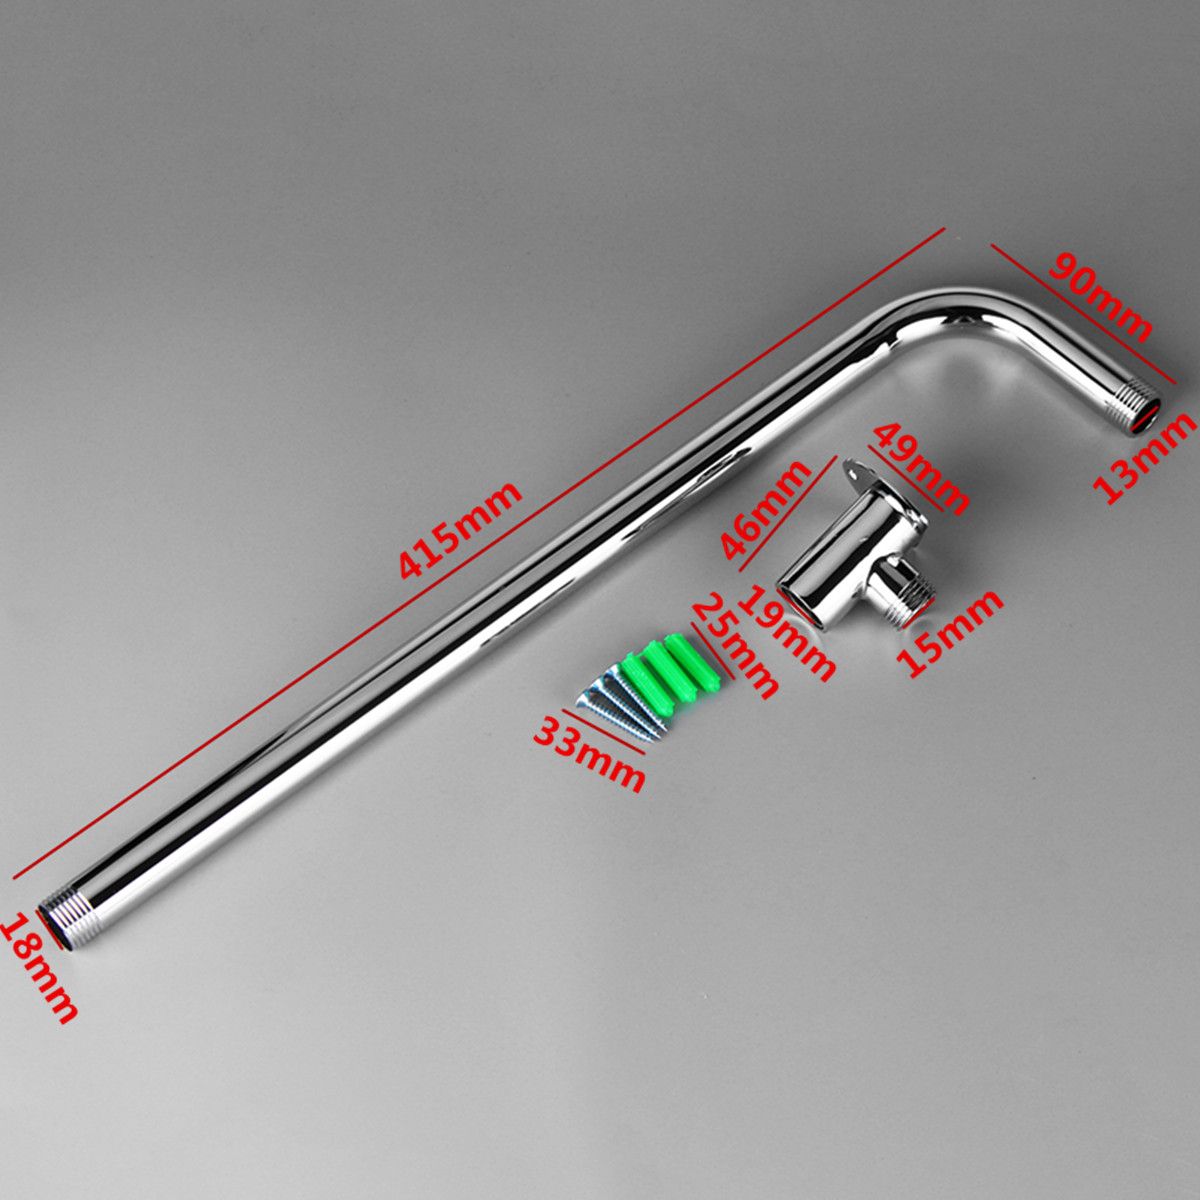 475mm-Long-Shower-Arm-Bottom-Entry-Wall-Mounted-Shower-Head-Extension-With-Copper-Base-1372276